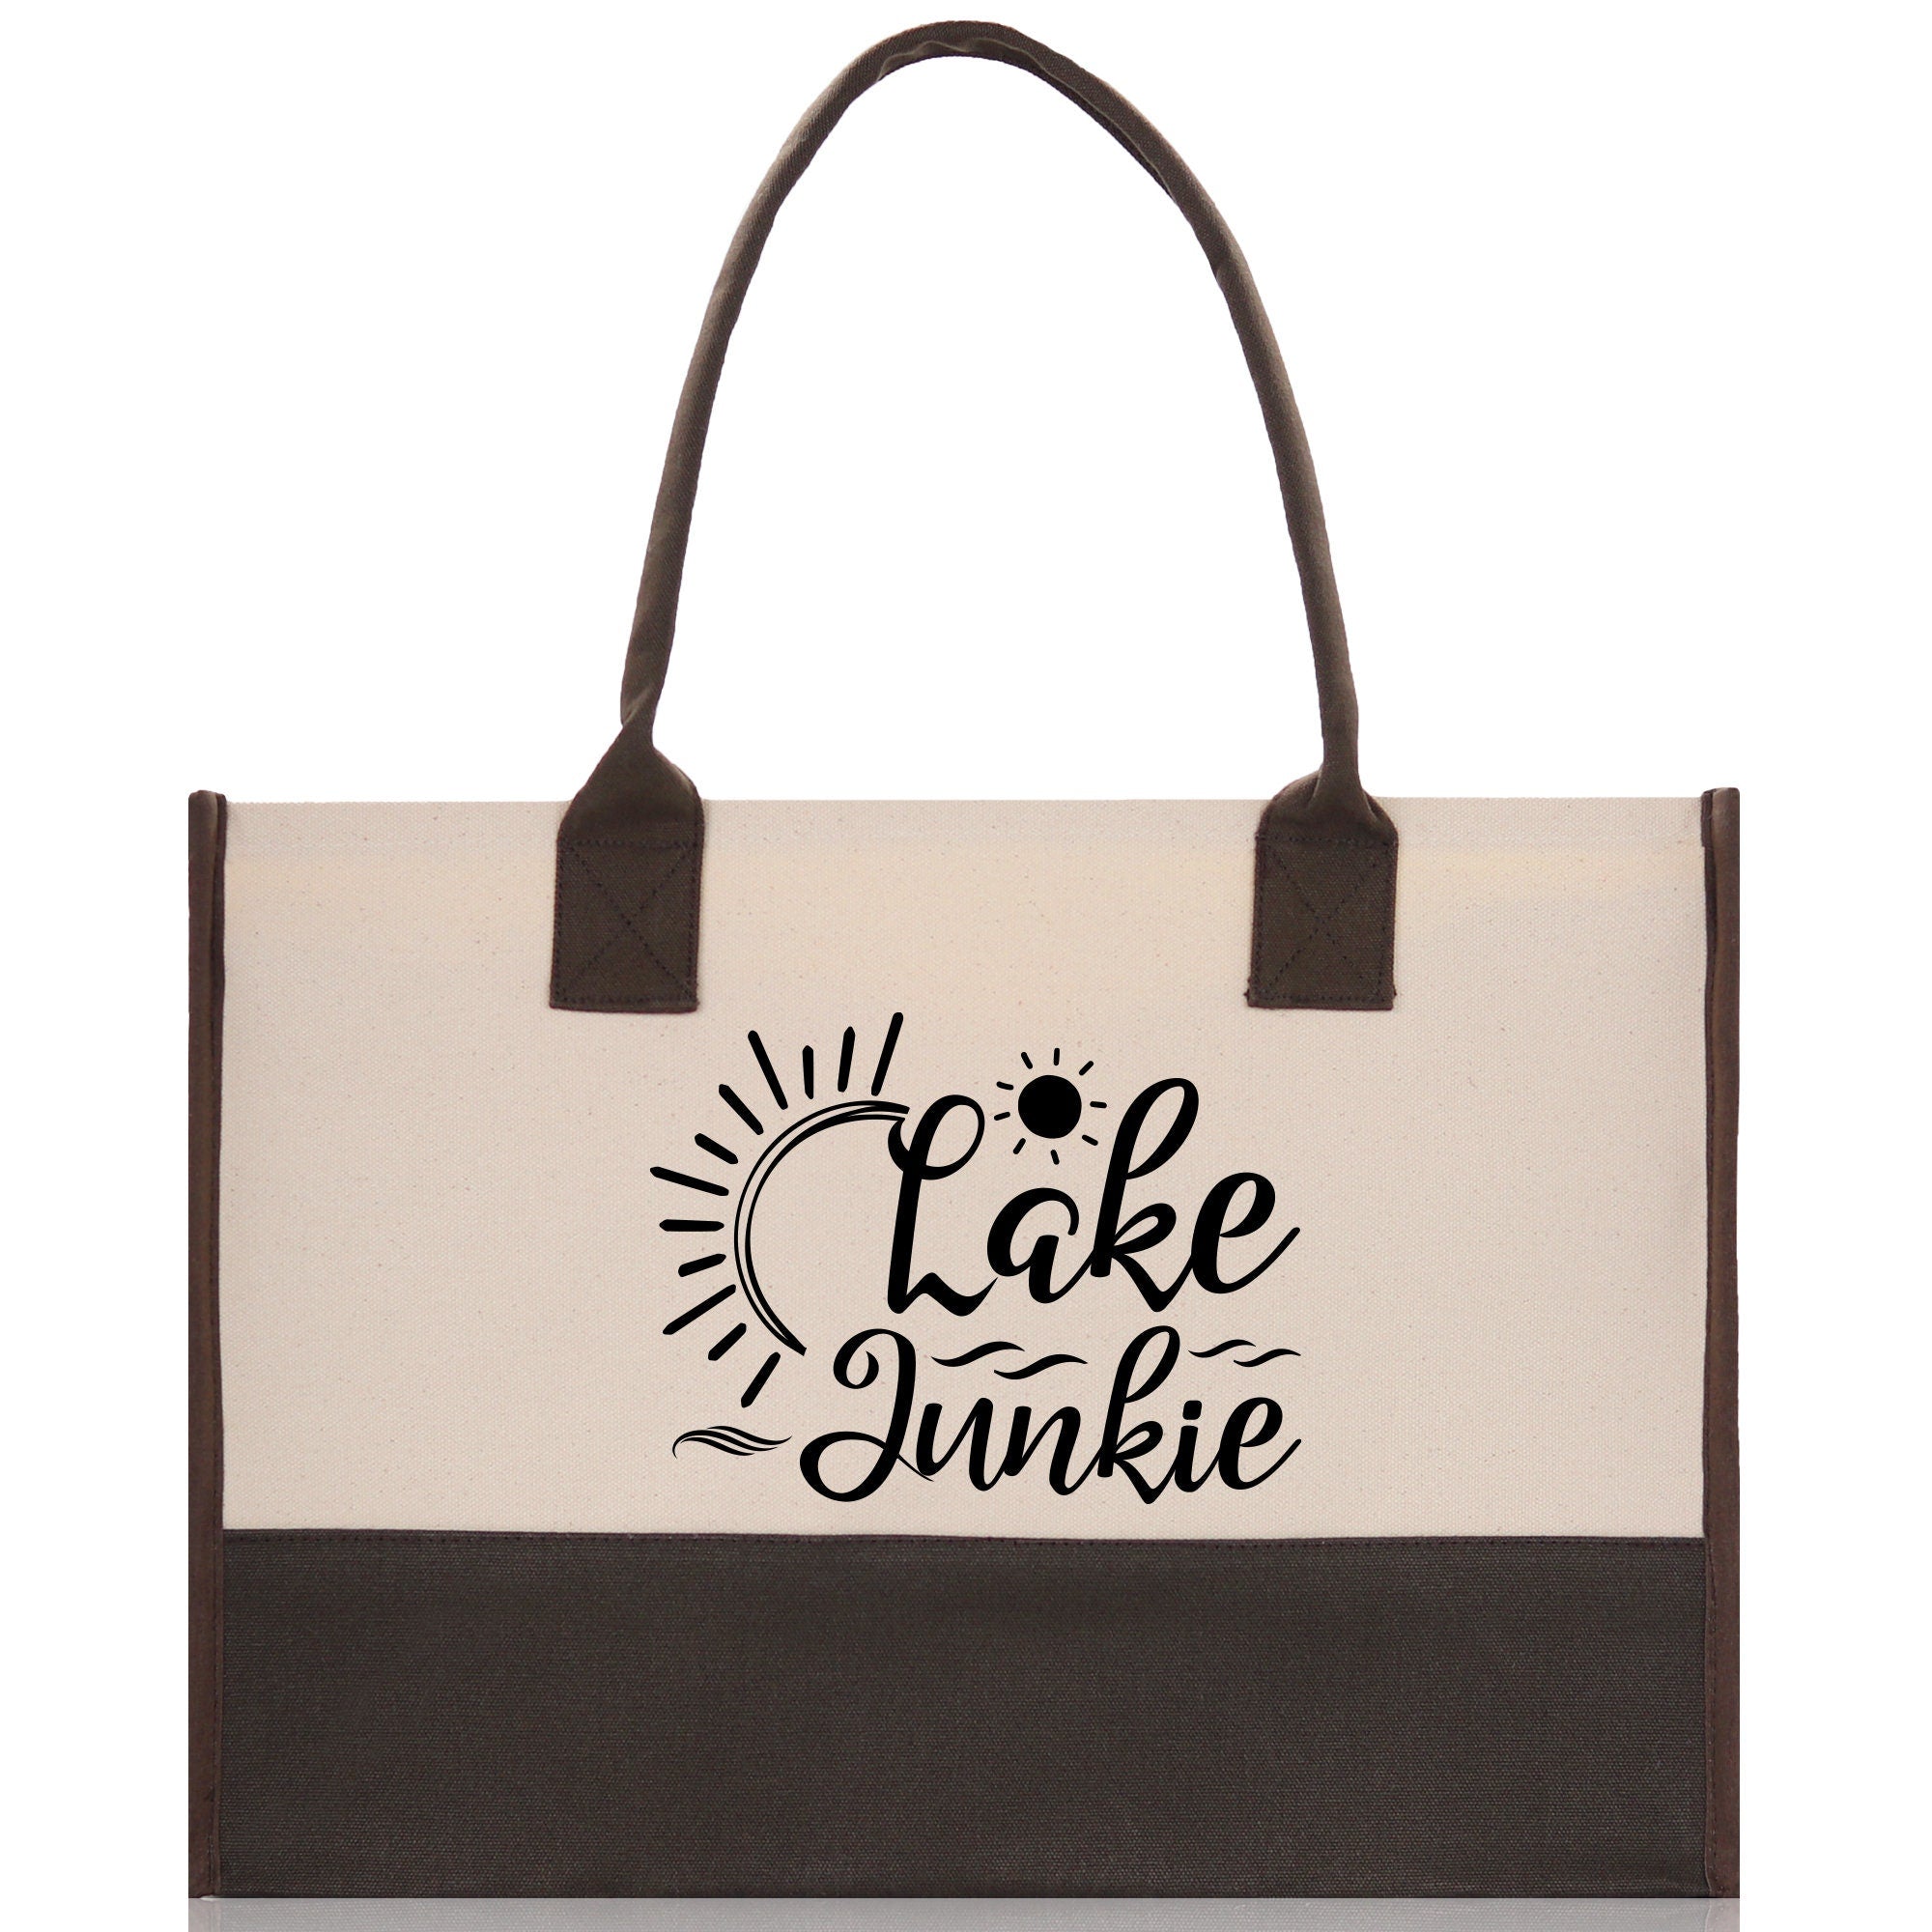 Lake Junkie Cotton Canvas Chic Tote Bag Camping Tote Lake Lover Gift Tote Bag Outdoor Tote Weekender Tote Laker Tote Multipurpose Tote